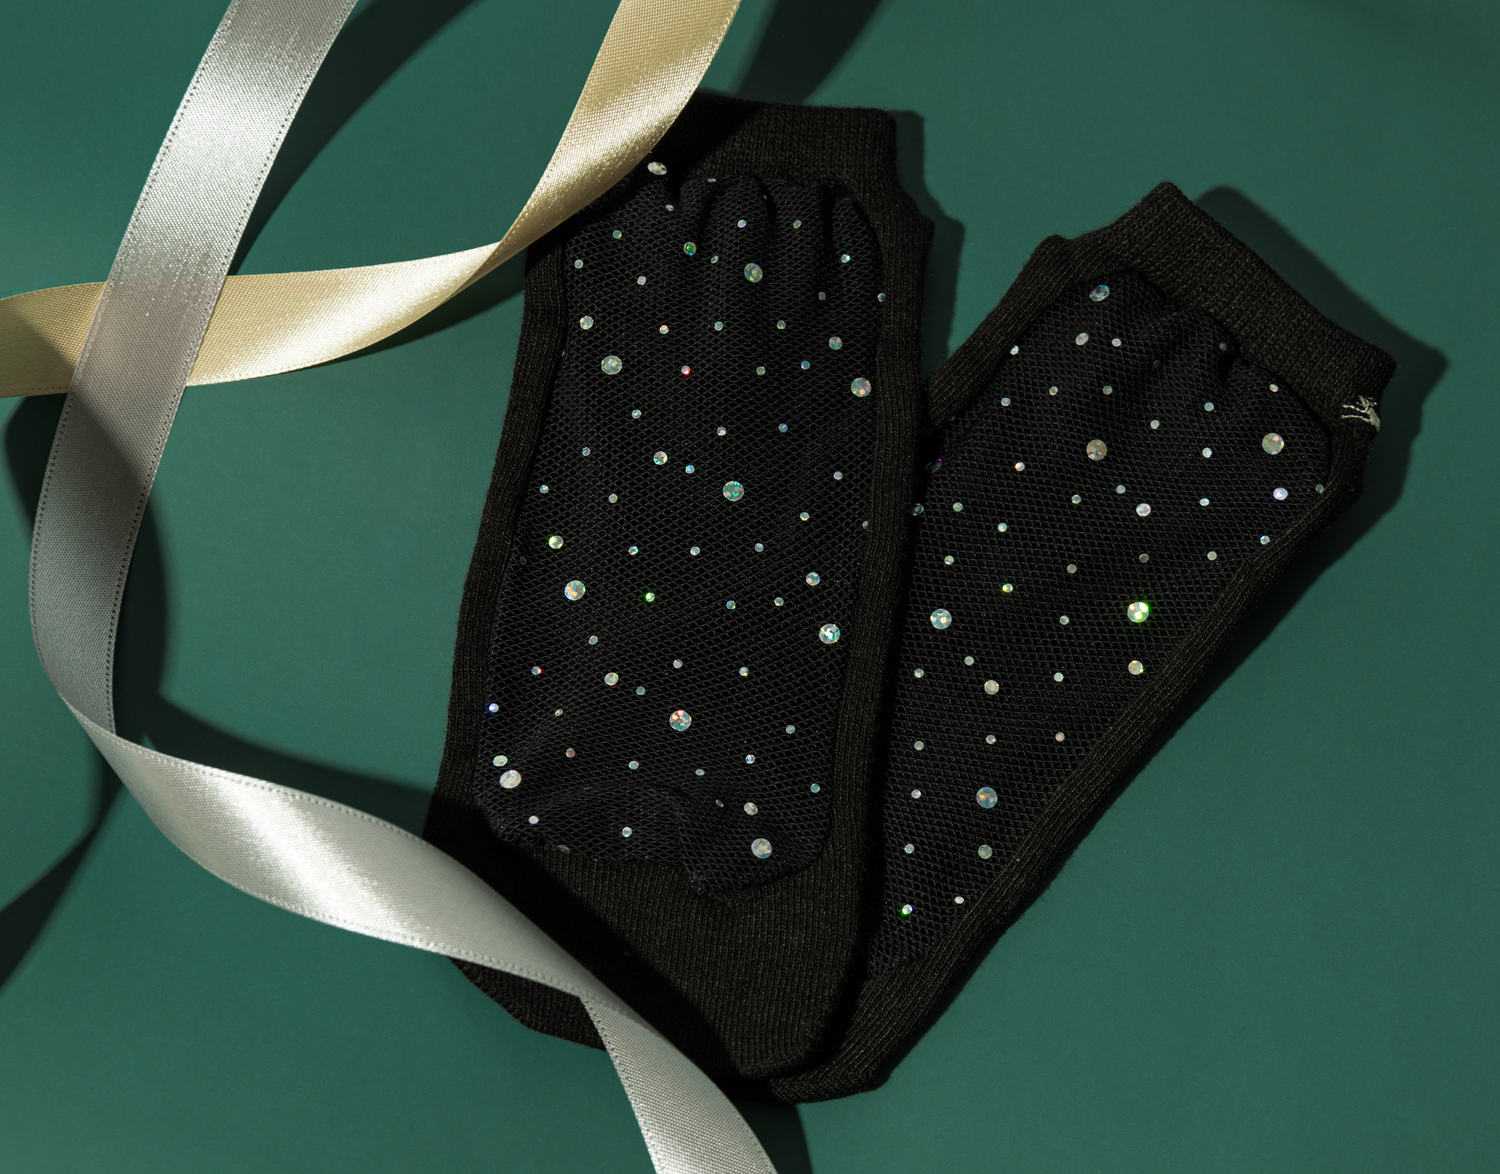 free sparkle grip socks with purchase